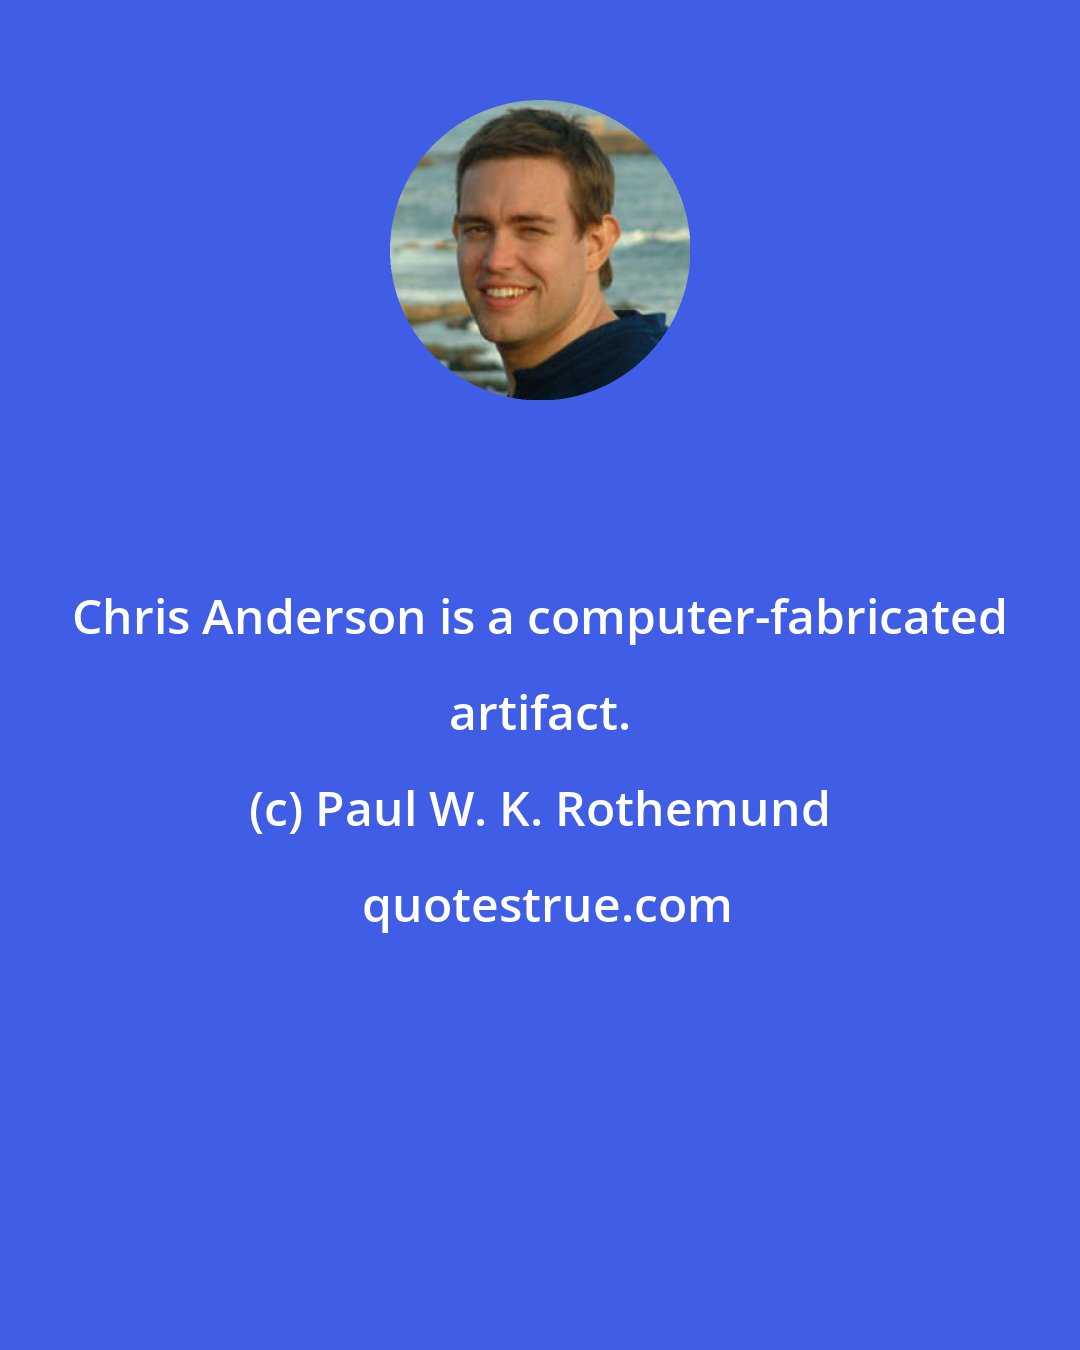 Paul W. K. Rothemund: Chris Anderson is a computer-fabricated artifact.